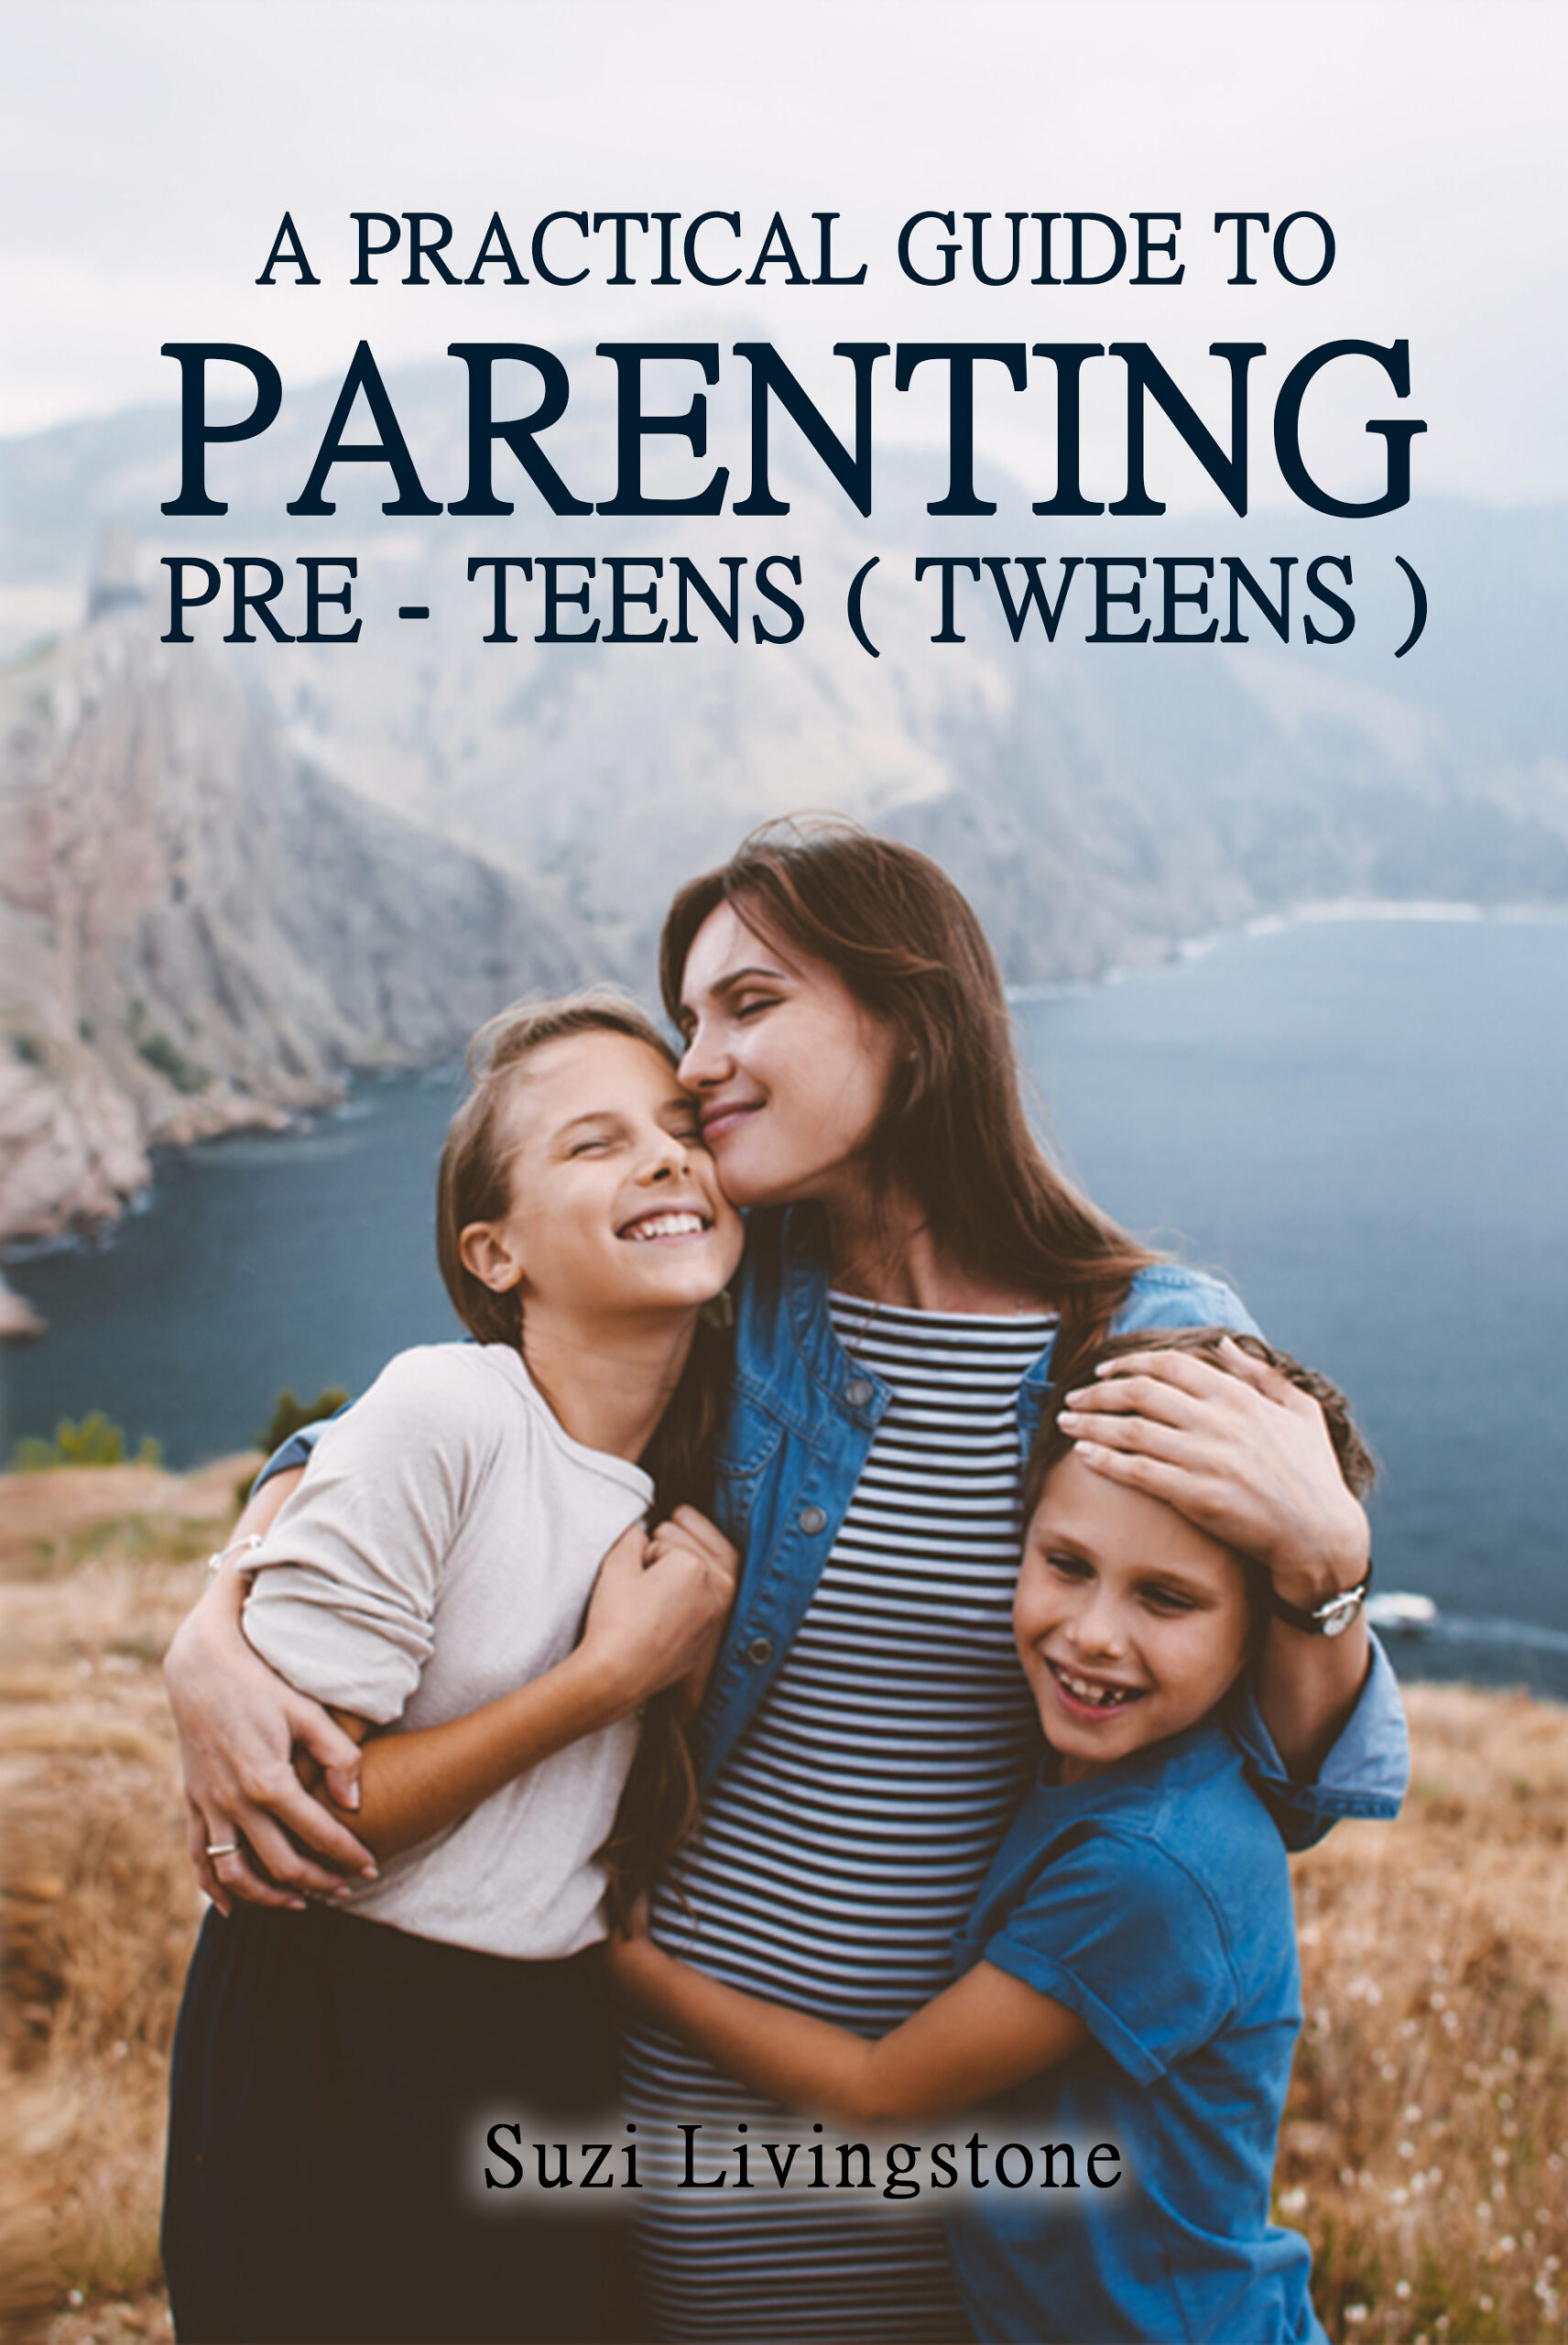 FREE: A Practical Guide to Parenting Pre-Teens (Tweens) by Suzi Livingstone